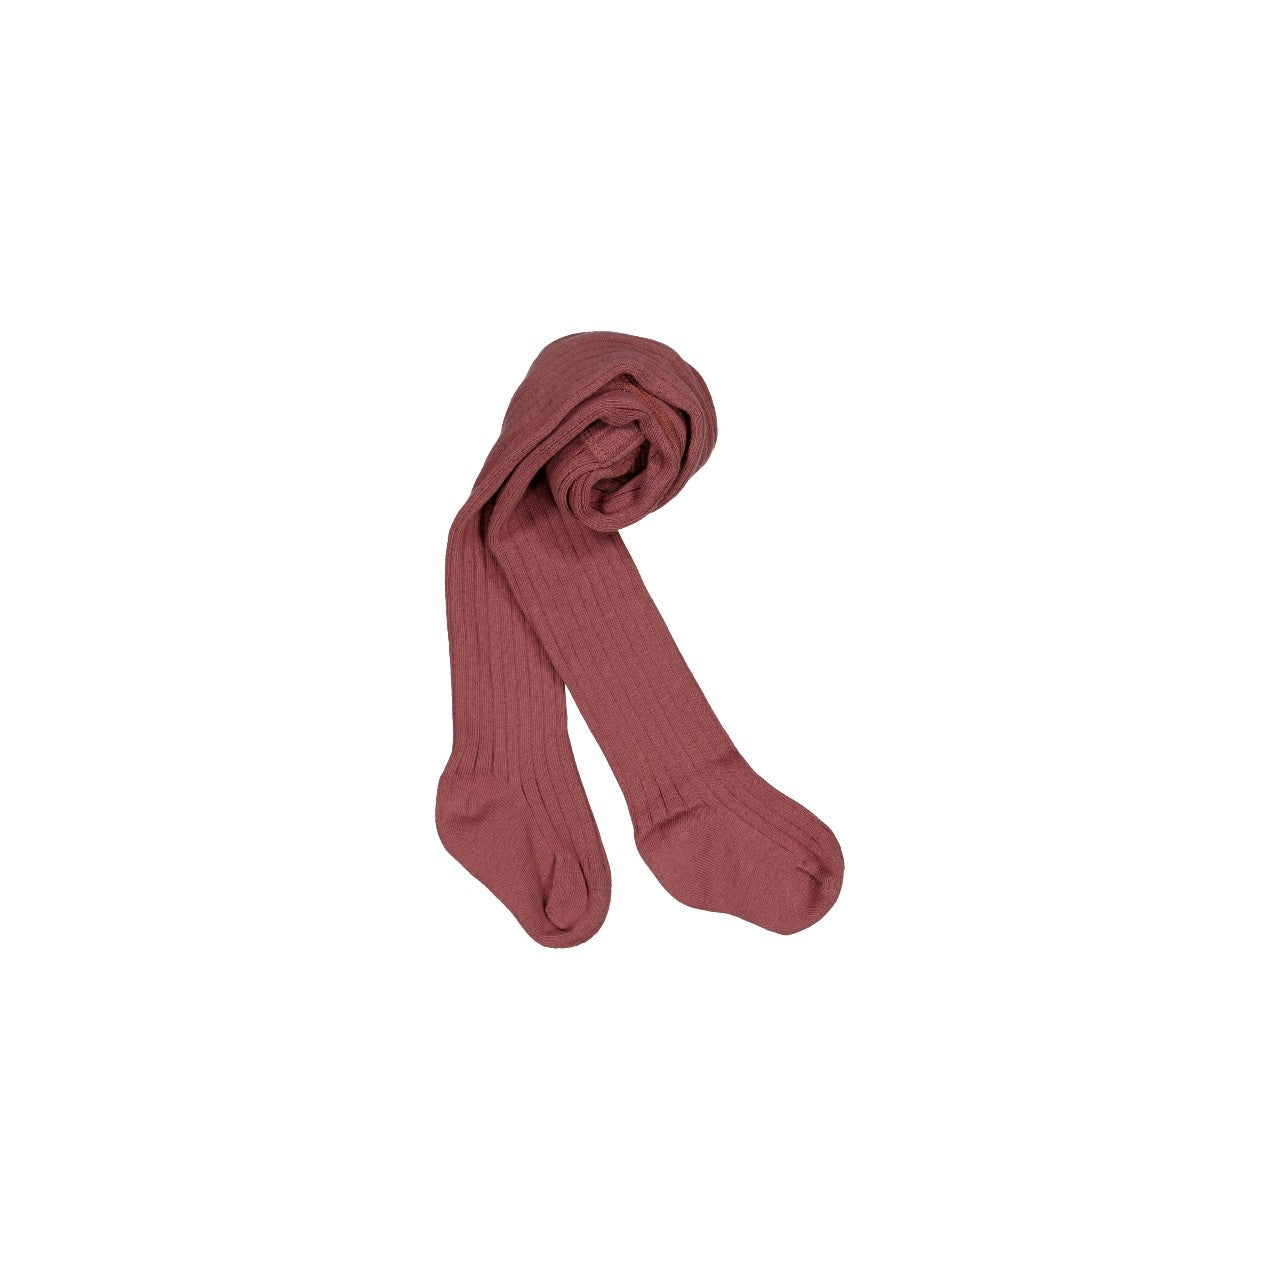 Footed Stocking - Plum